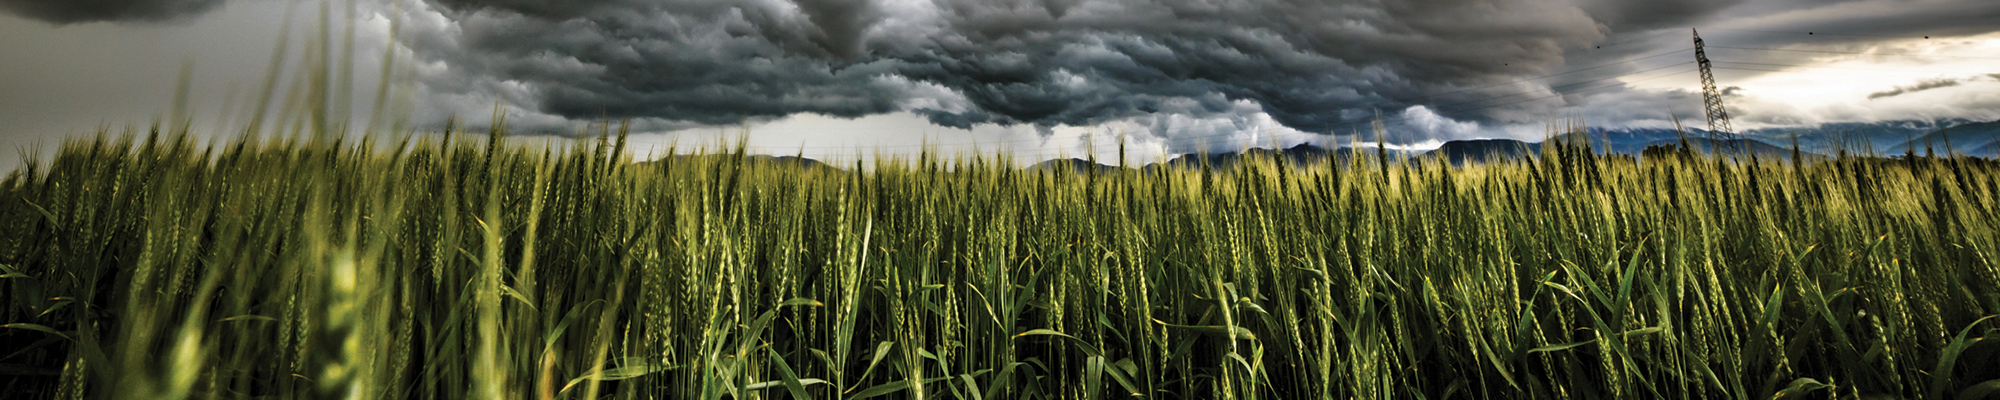 Storm rolling in over field of crops